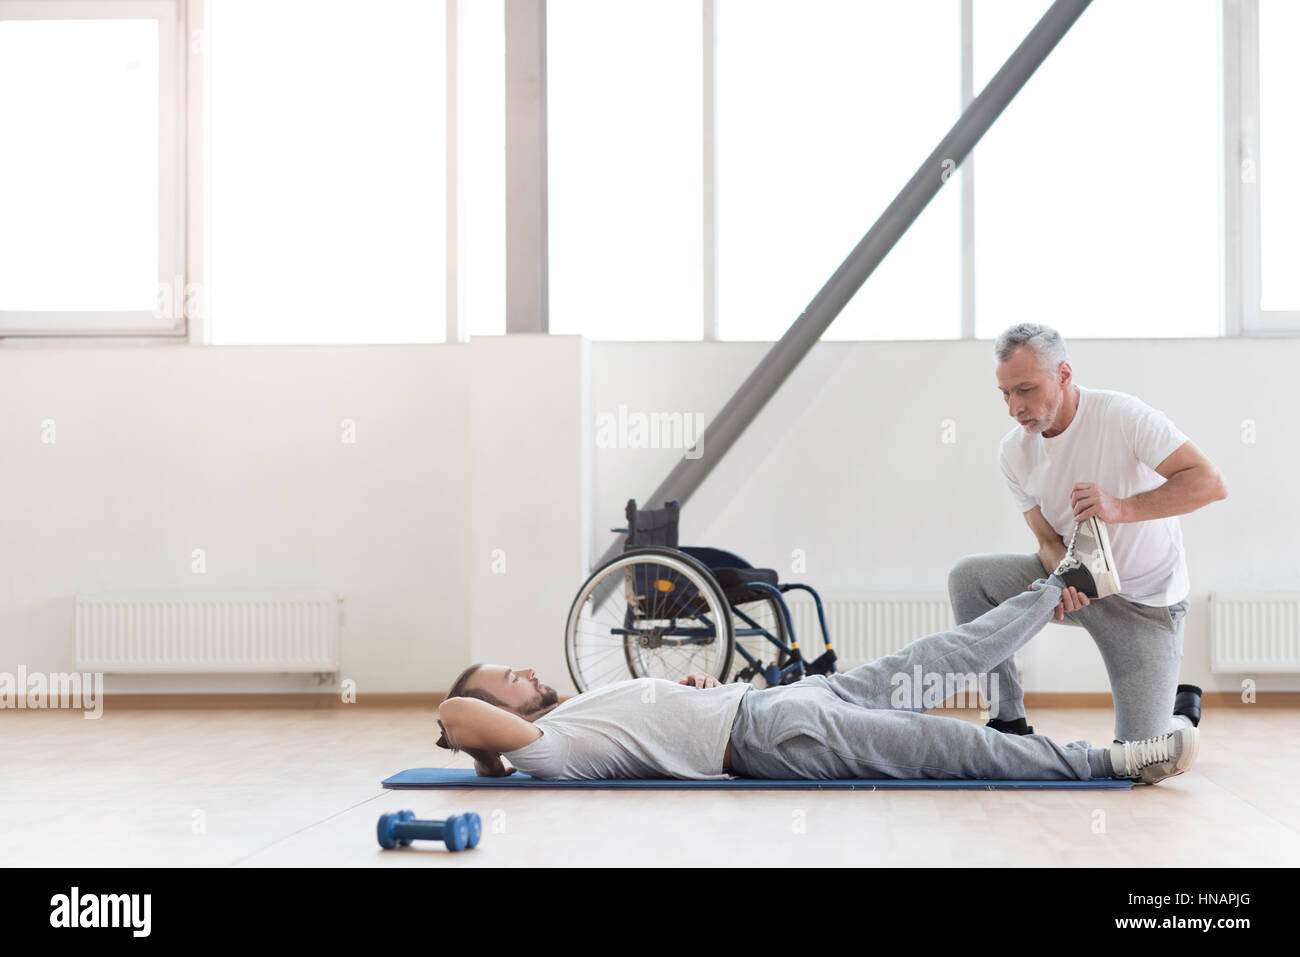 Skilled orthopedist working out with disabled patient in the gym Stock Photo